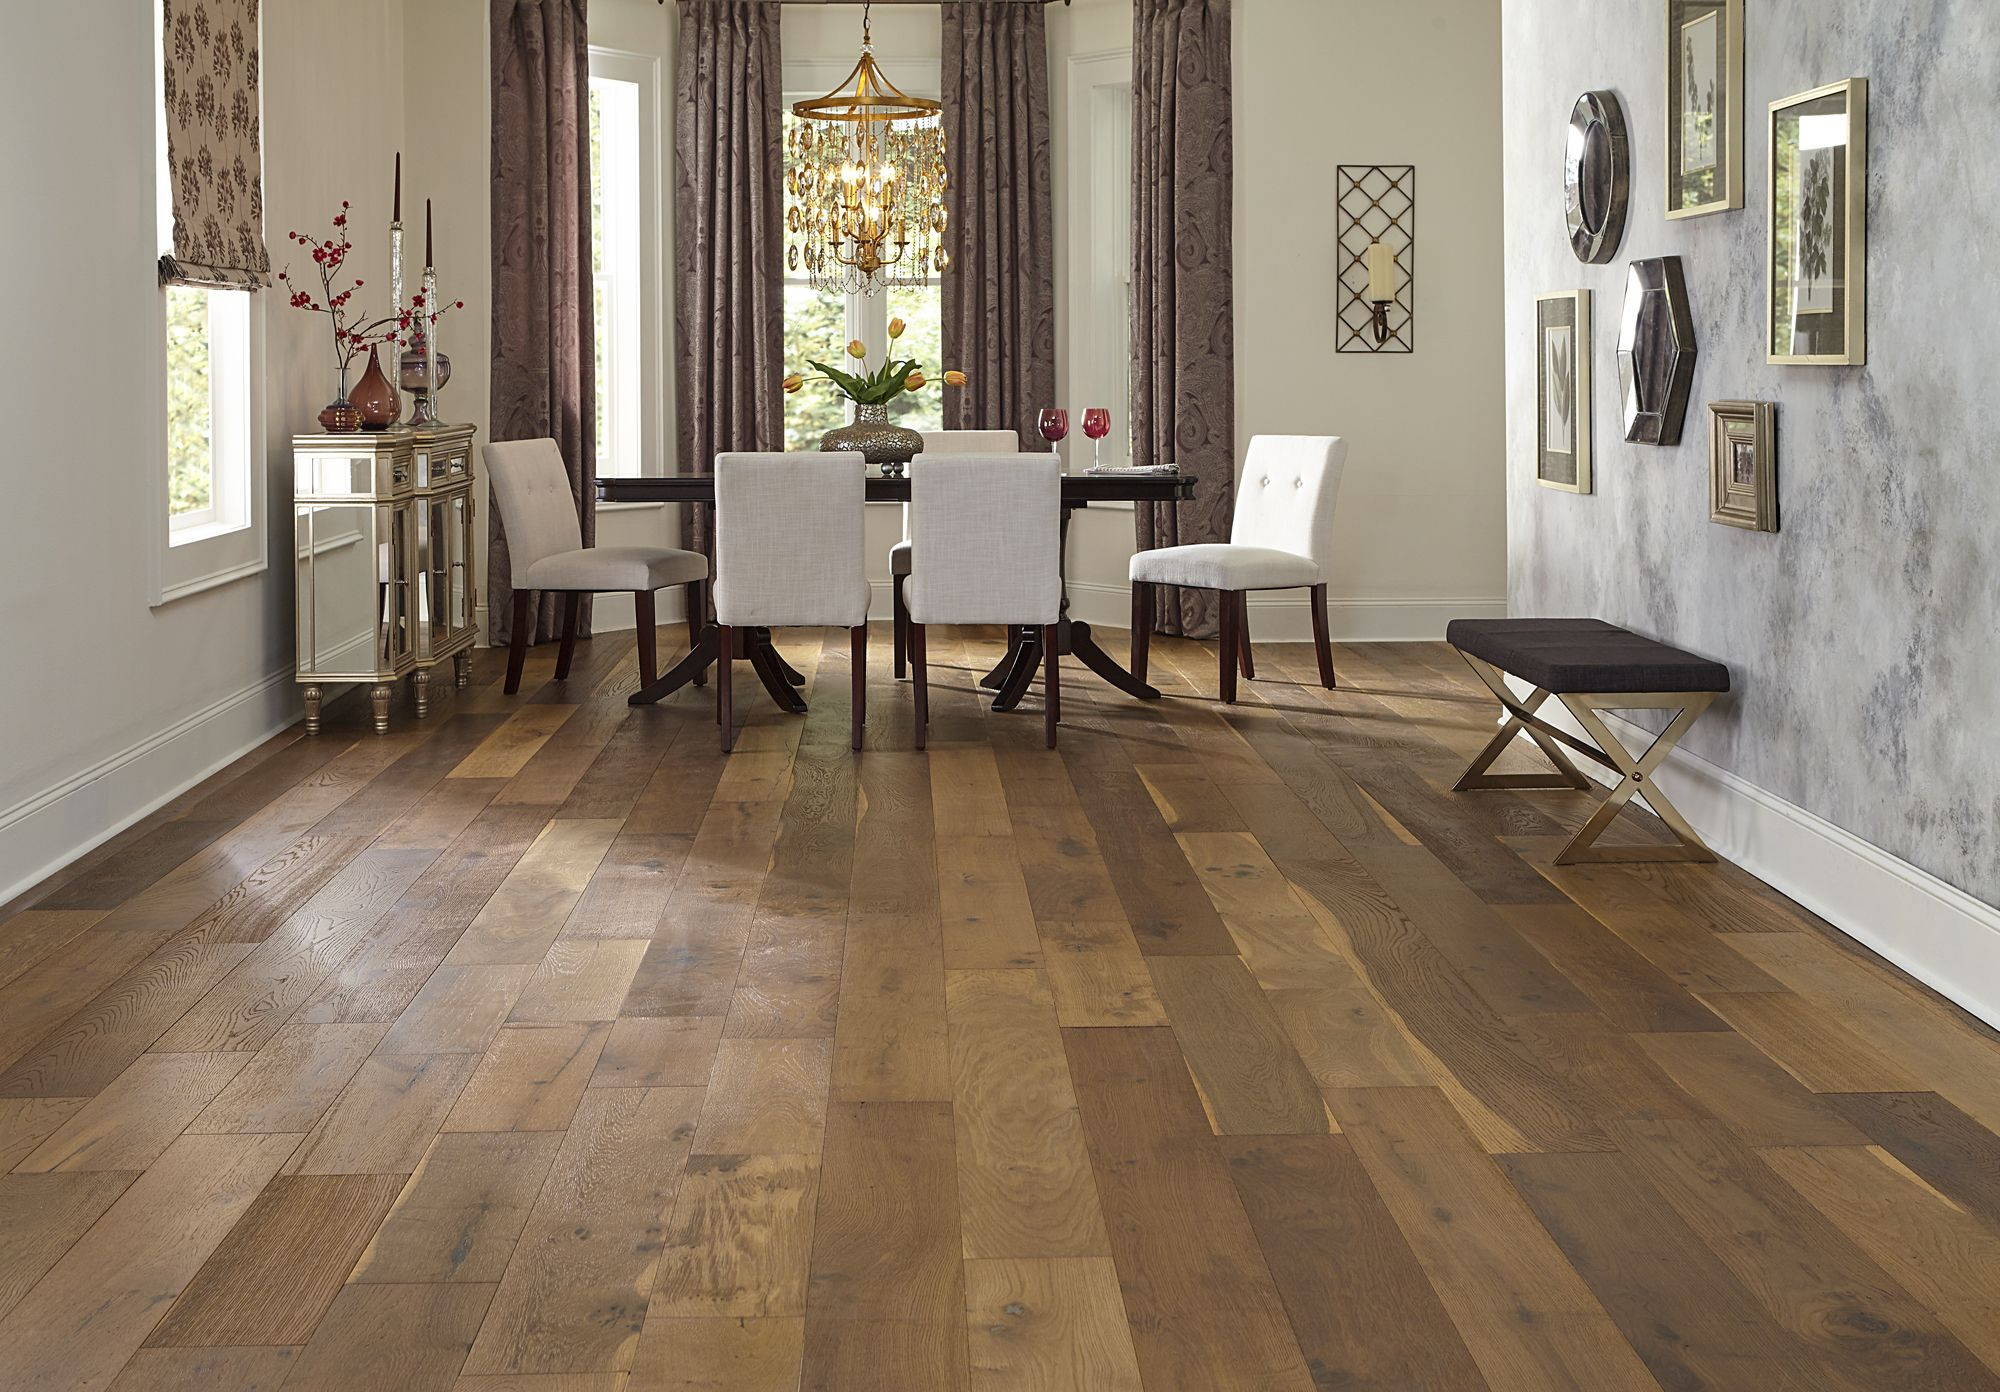 stonewood acacia hardwood flooring of 7 1 2 wide planks and a rustic look bellawood willow manor oak has with regard to 7 1 2 wide planks and a rustic look bellawood willow manor oak has a storied old world appearance